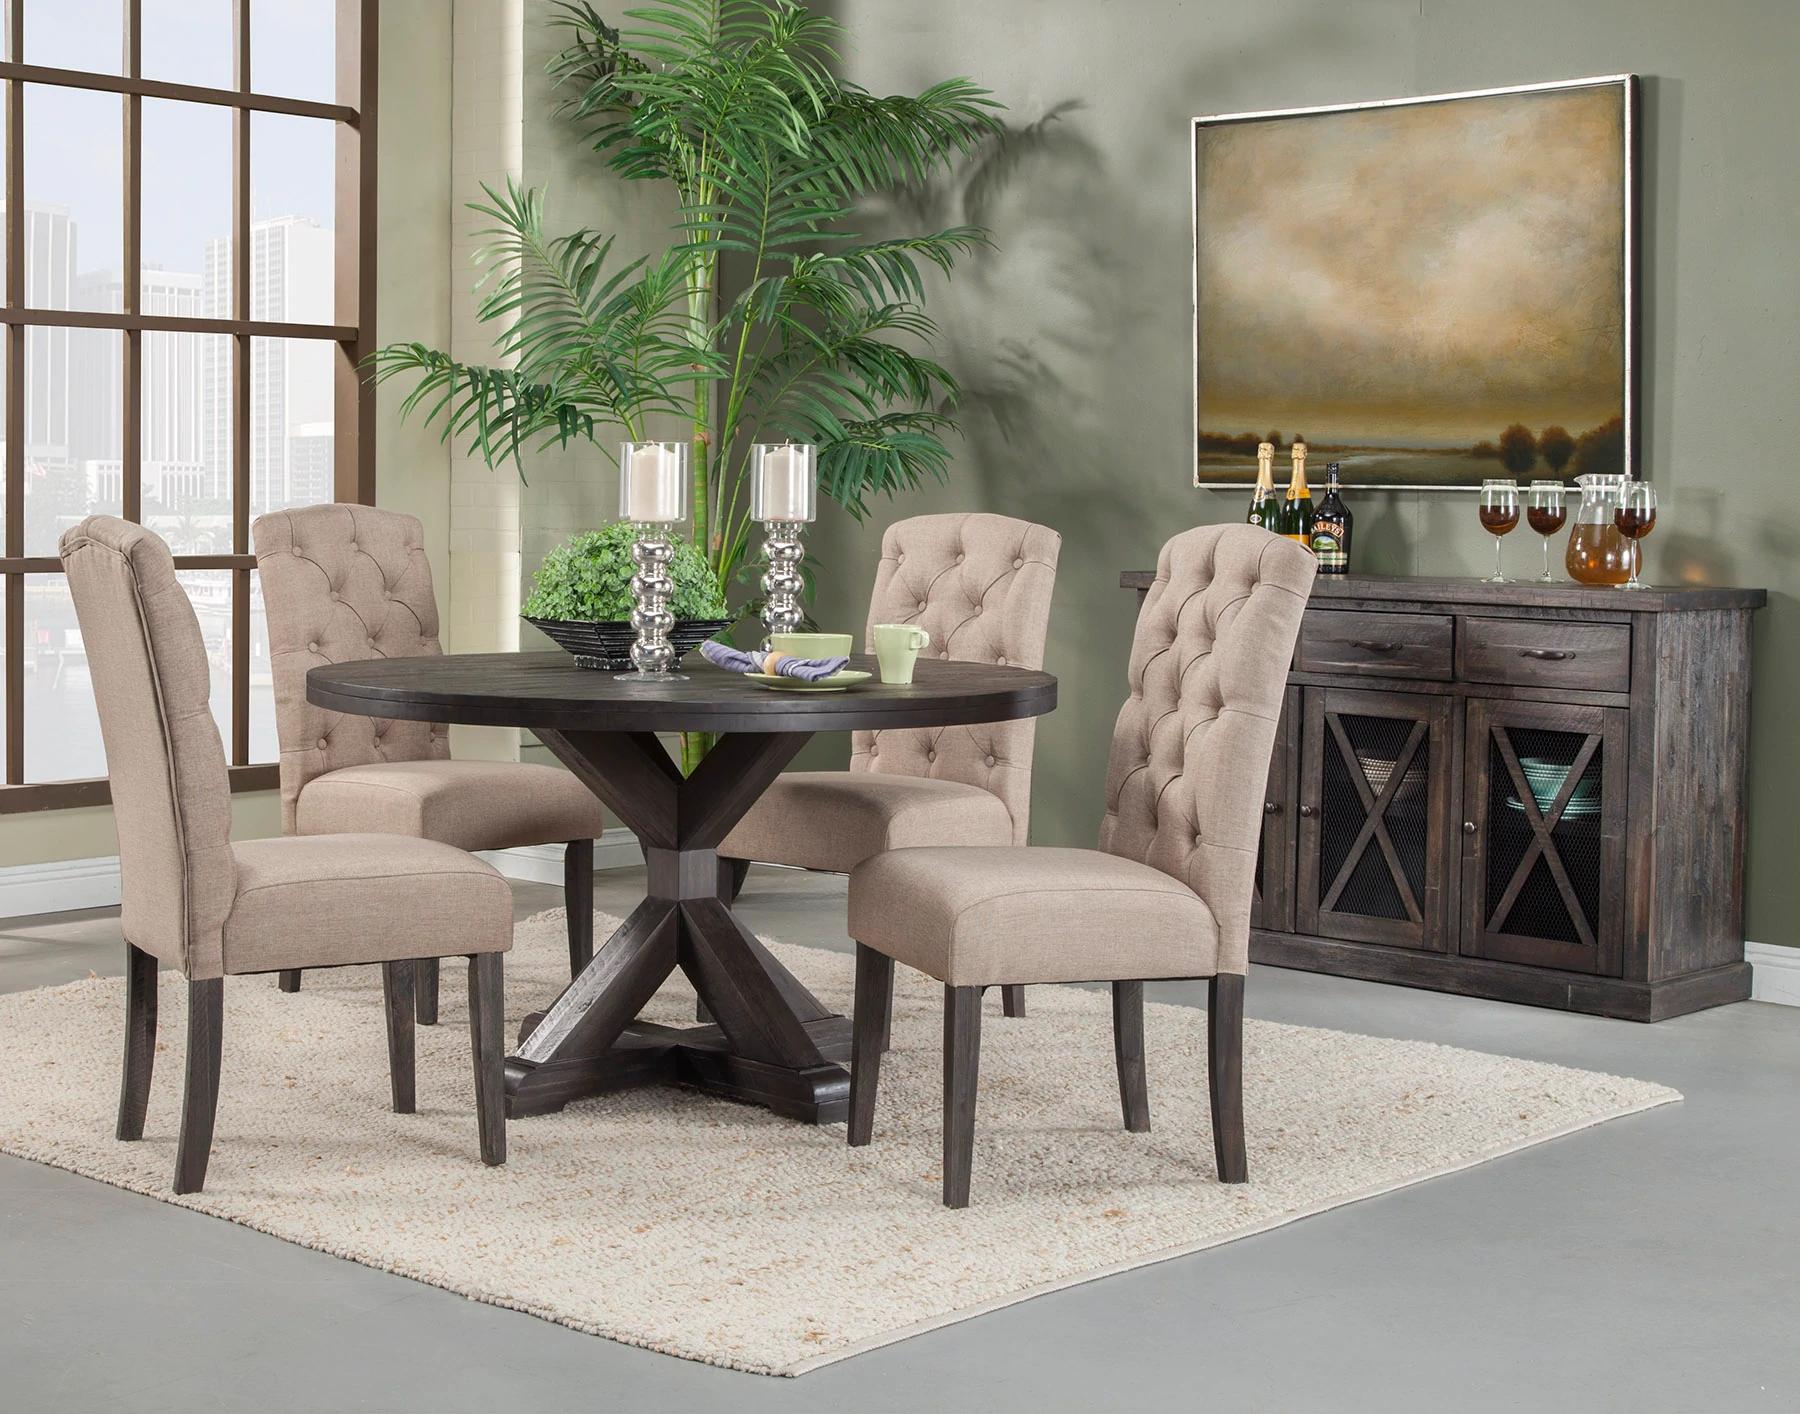 Traditional Dining Table Set NEWBERRY 1468-25-Set-5 in Cream, Gray Fabric